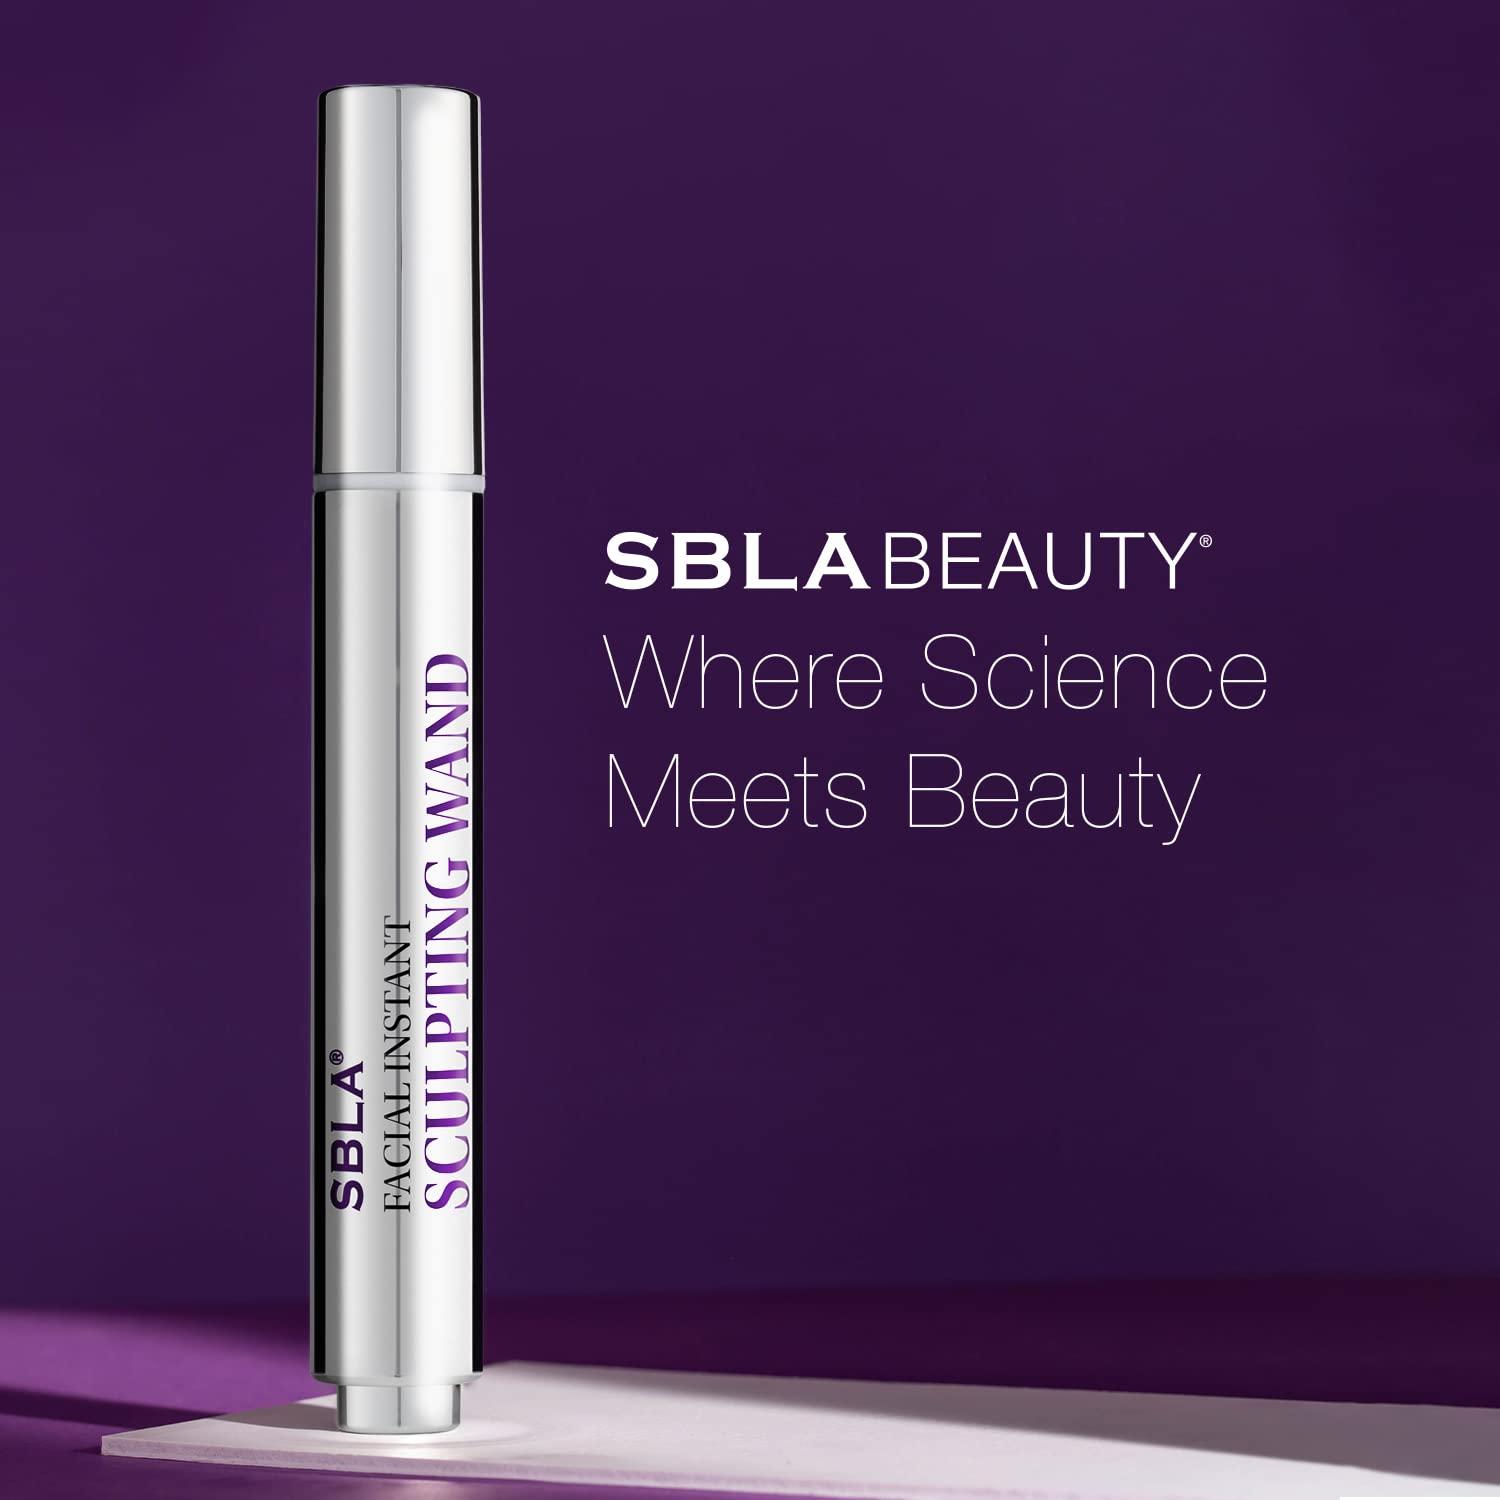 SBLA Beauty Facial Instant Sculpting Wand Advanced Anti-Aging Serum For  Smoothing Skin Tightening Brightening All Skin Types & Reducing Lines and  Wrinkles Vitamin C Instant Facial Wand 0.23 Fl Oz / 6.8mL (